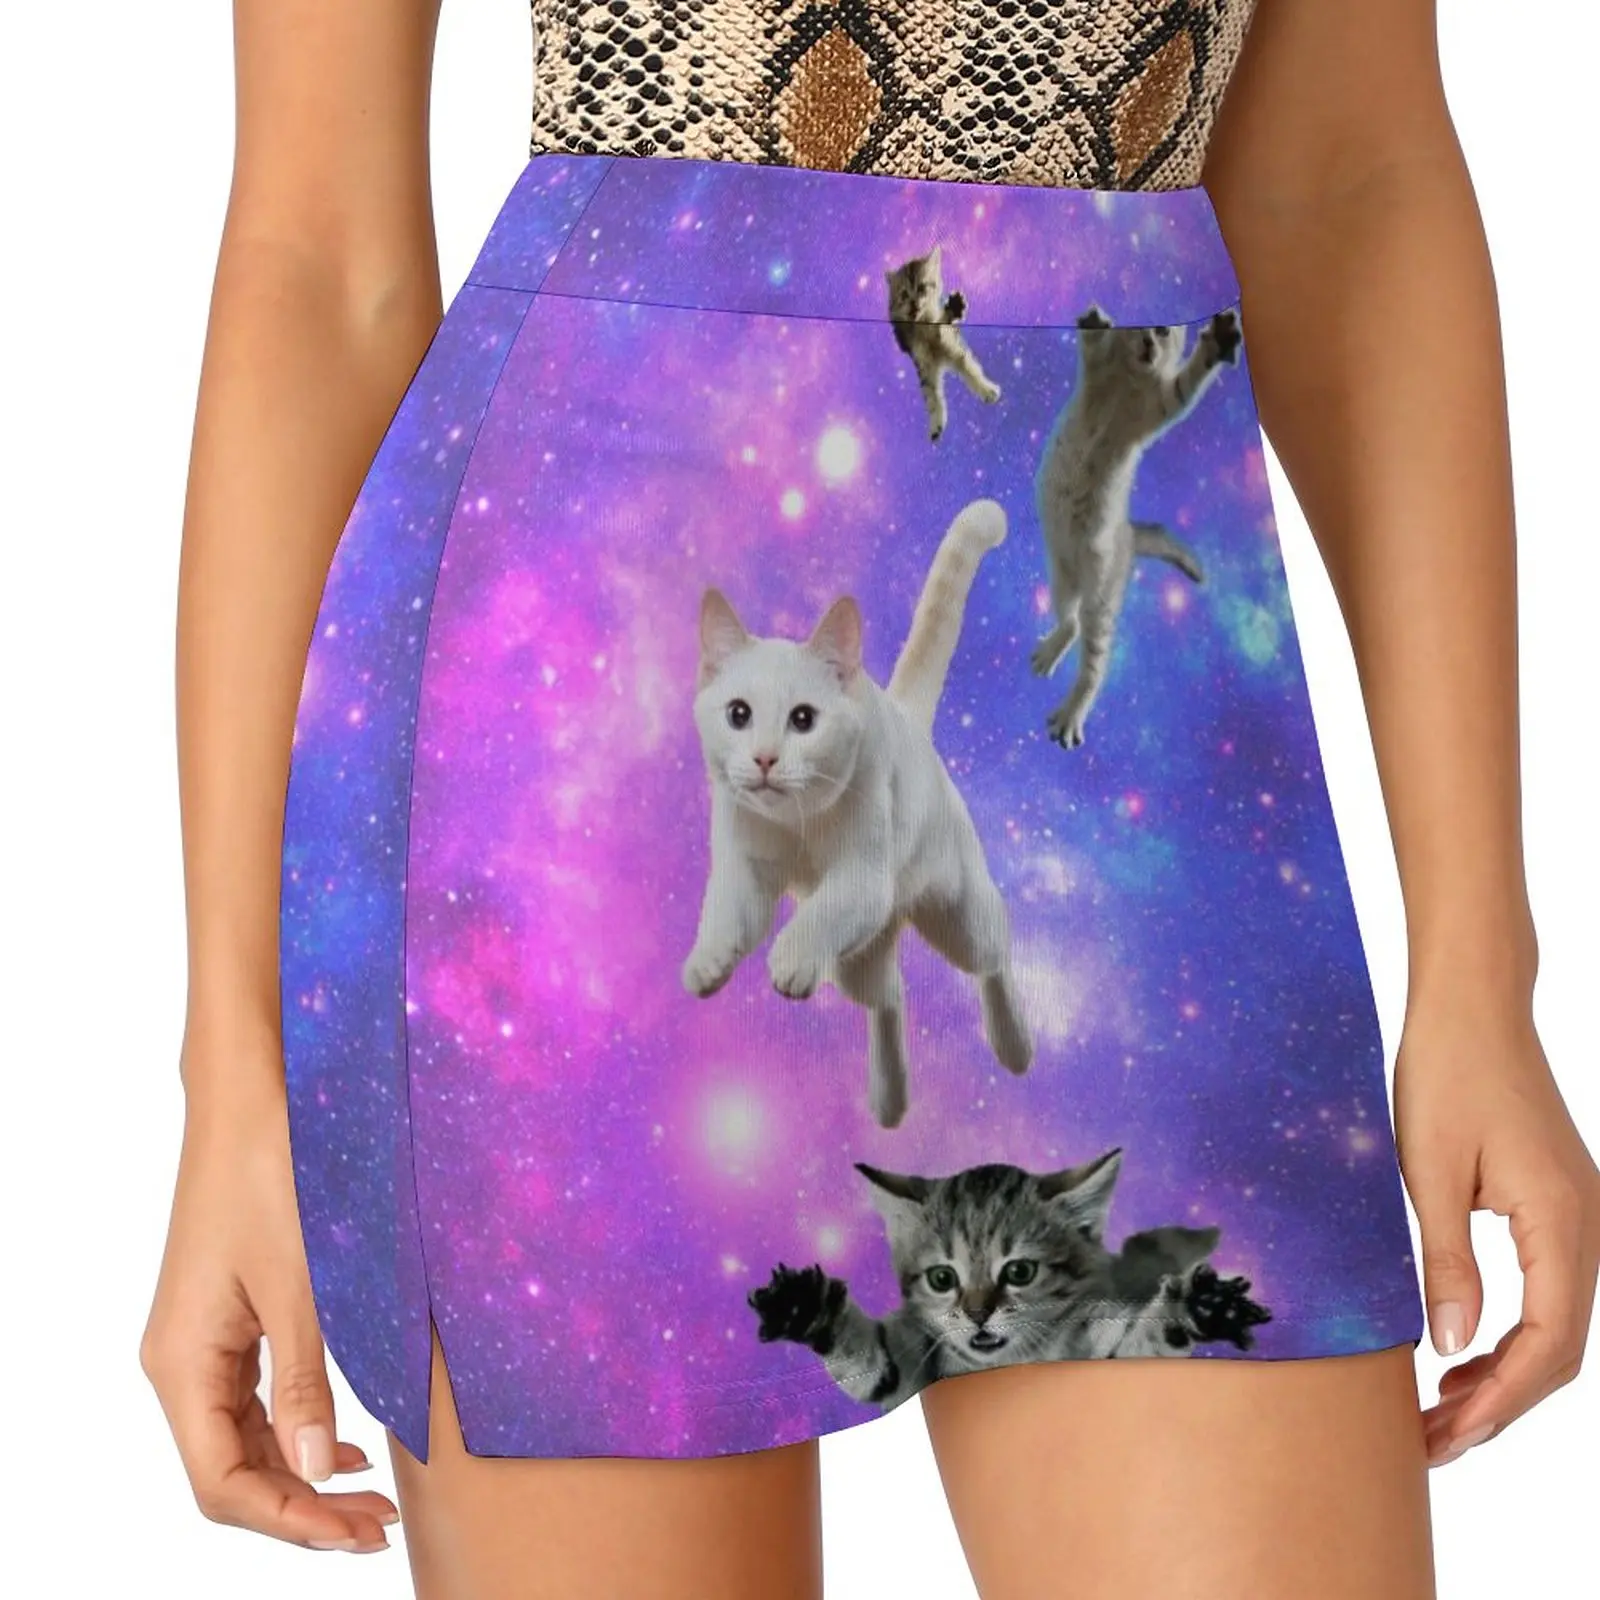 Cats in Space! Light Proof Trouser Skirt luxury evening dresses 2023 women's stylish skirts Korean skirts skirts for womens bird feeding gloves bite proof handling gloves long arm protection for cats dogs birds thickened resistant to bites for grooming